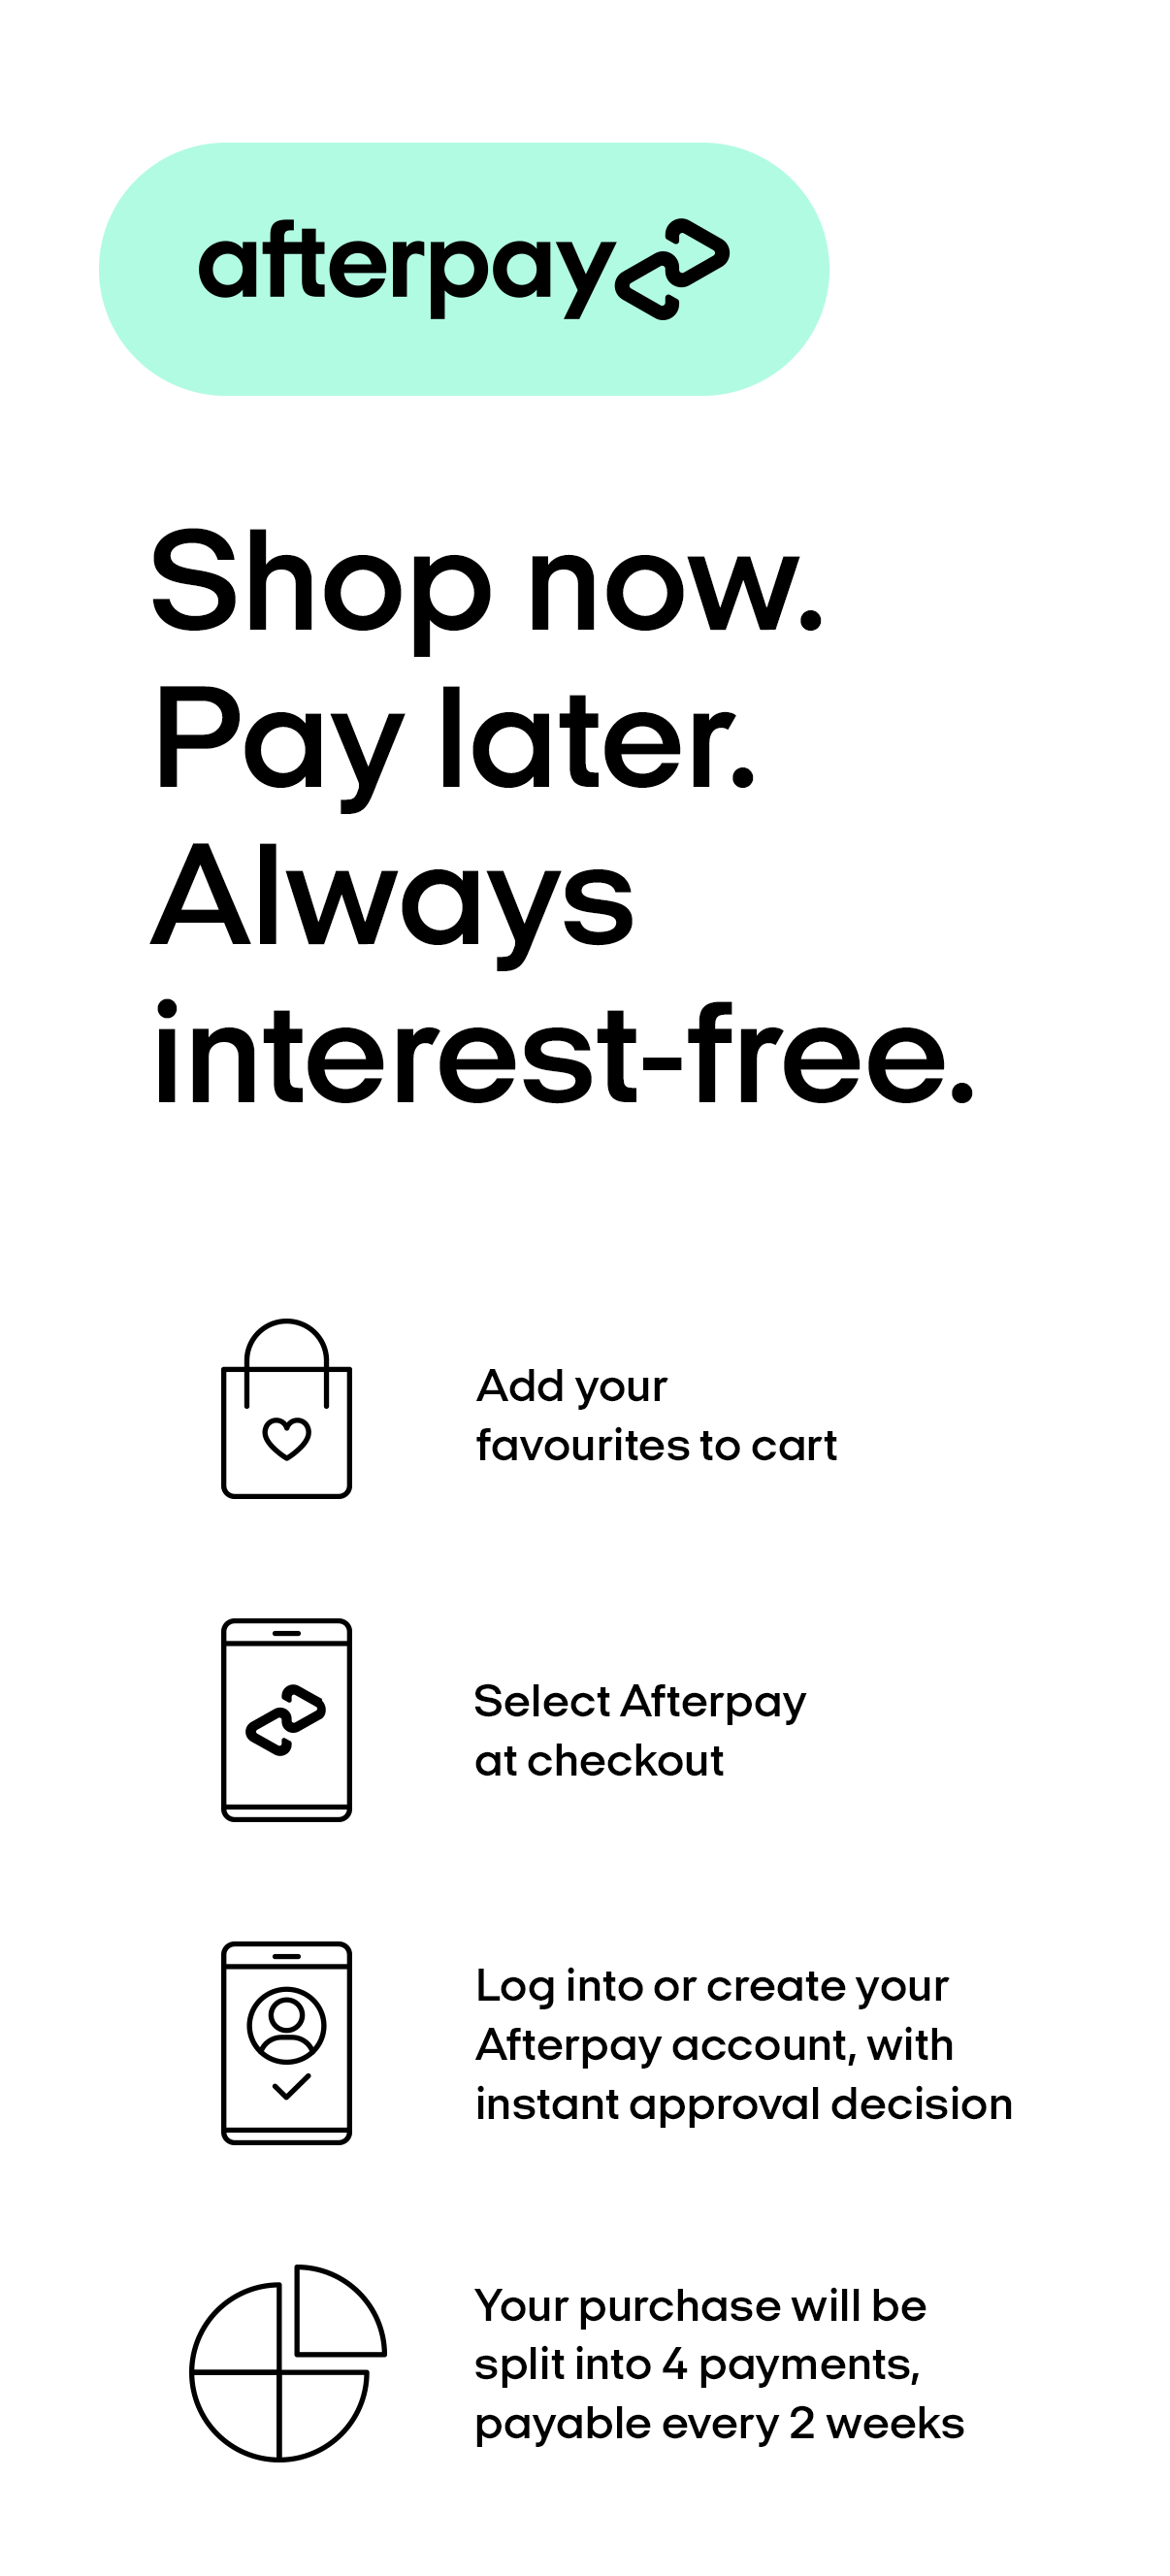 afterpay-info